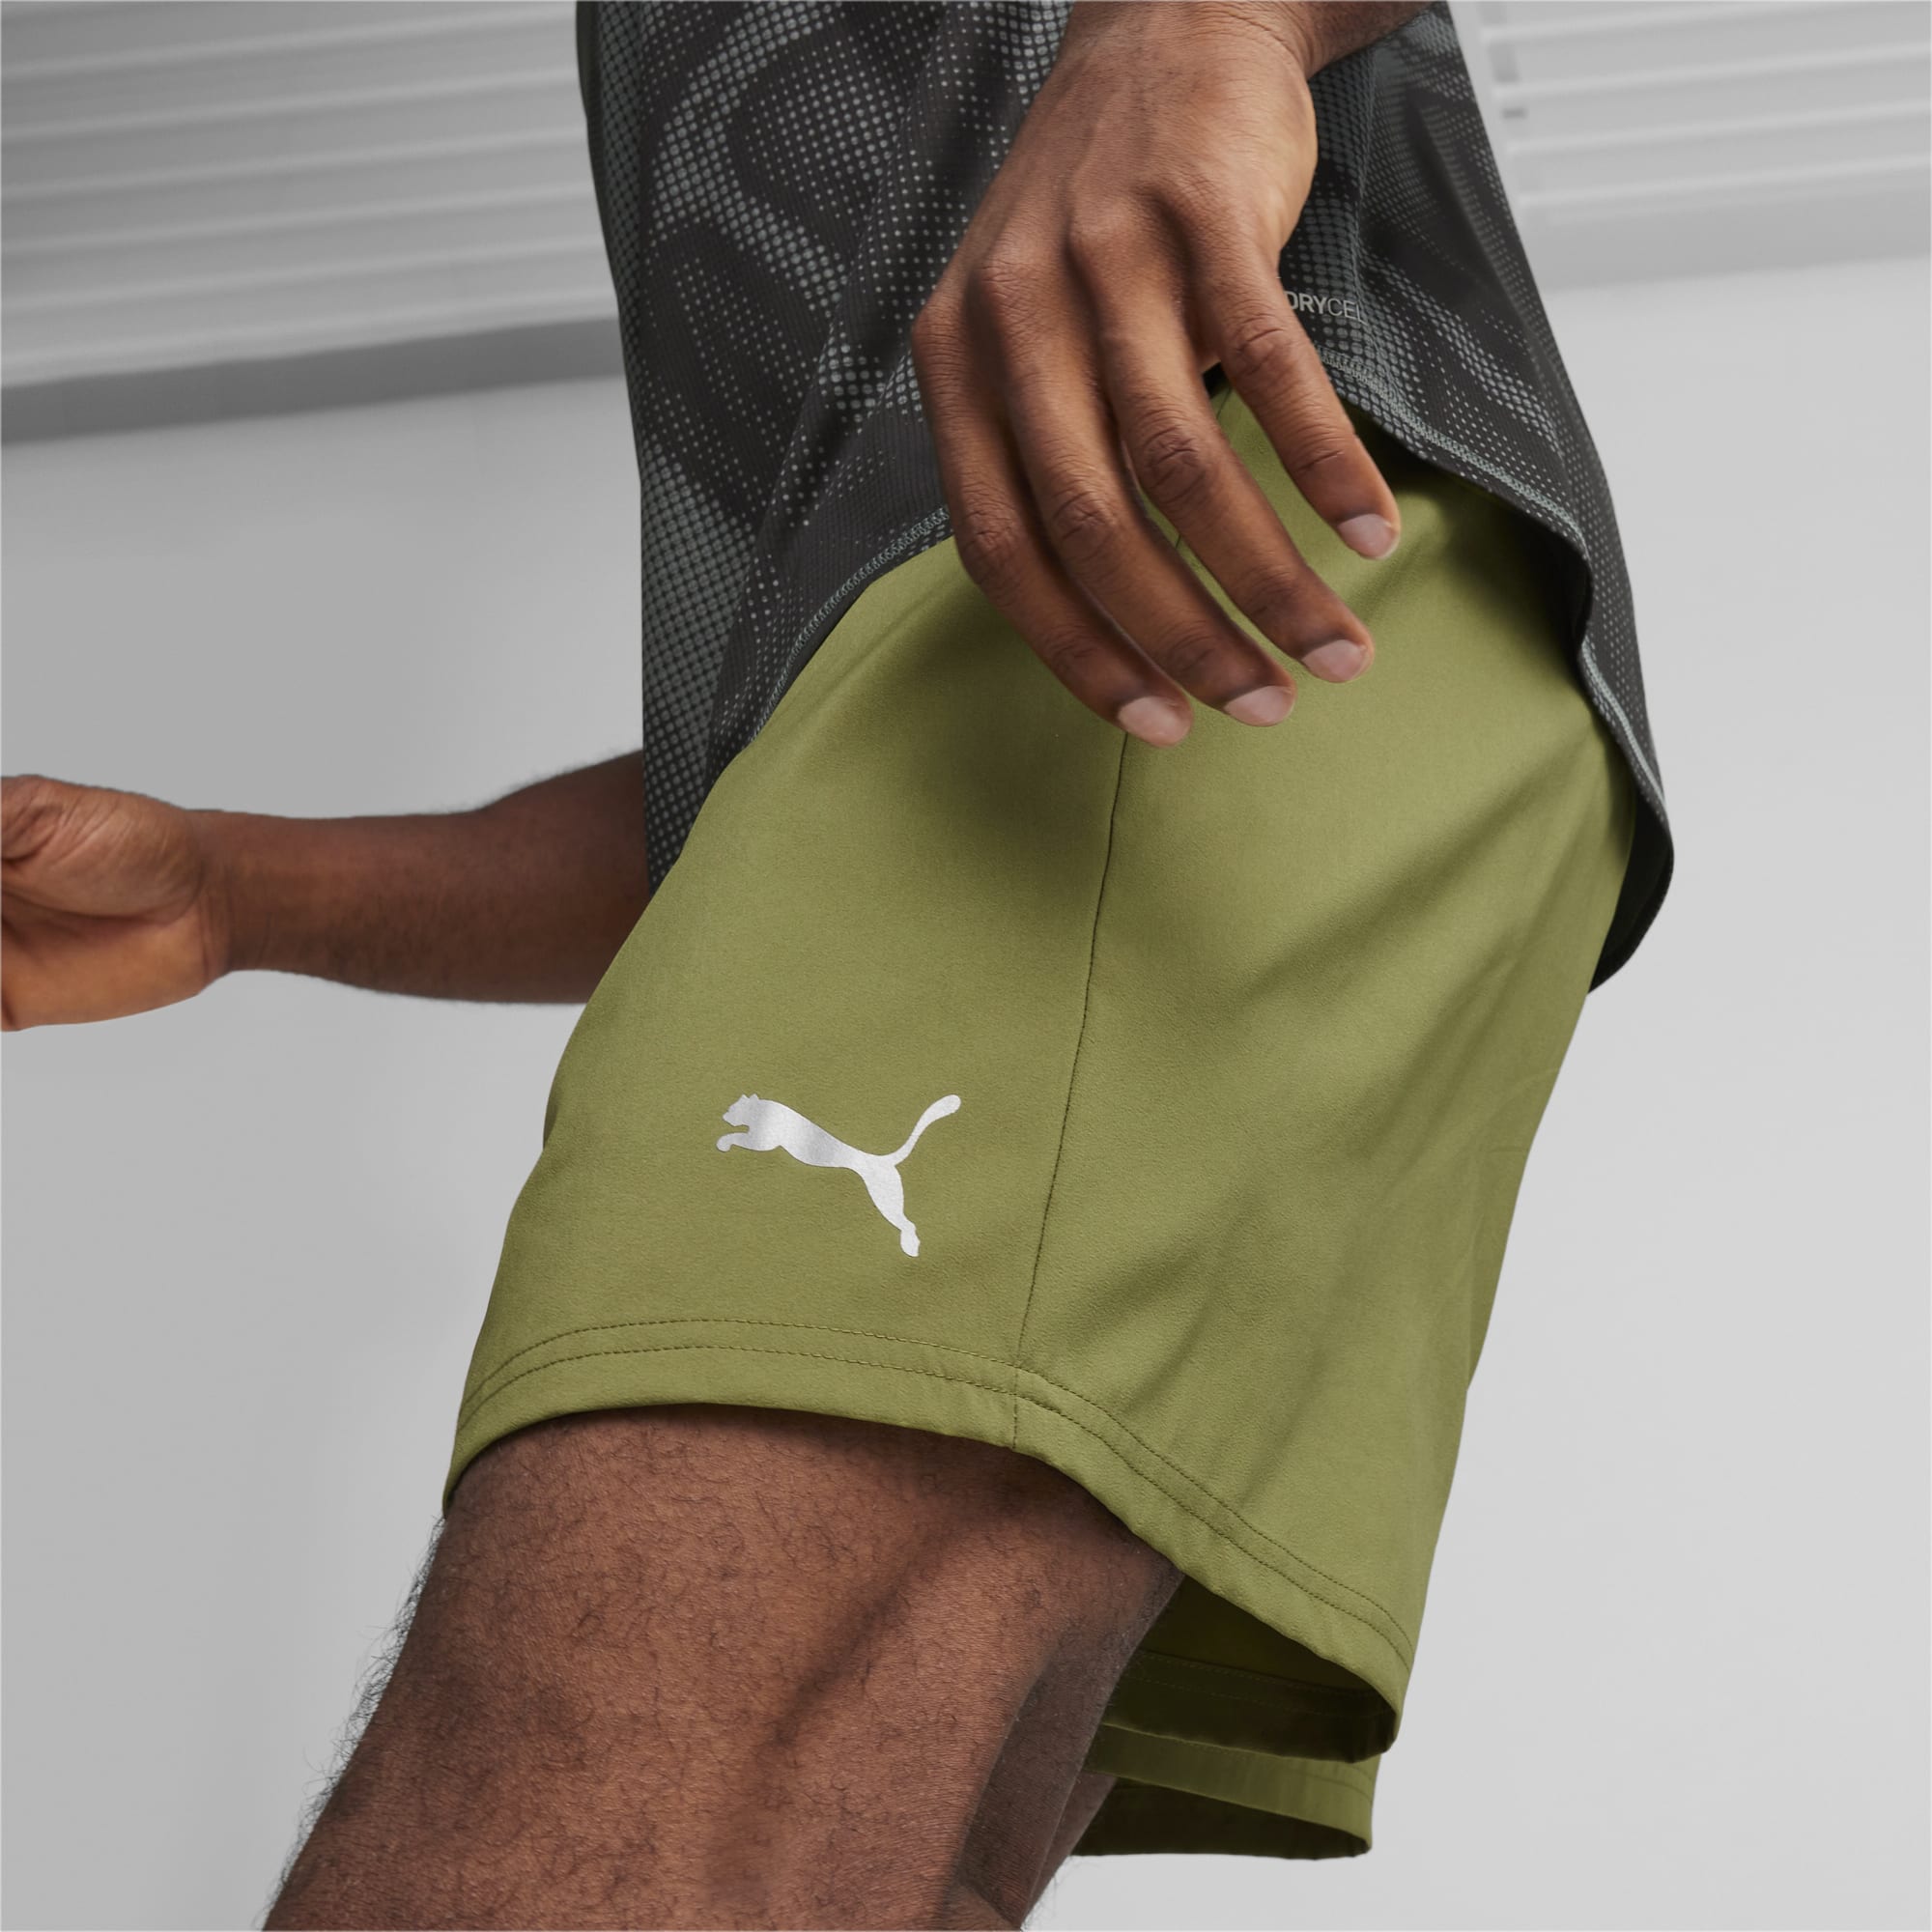 PUMA Favourite 2-in-1 Men's Running Shorts, Olive Green, Size XL, Clothing